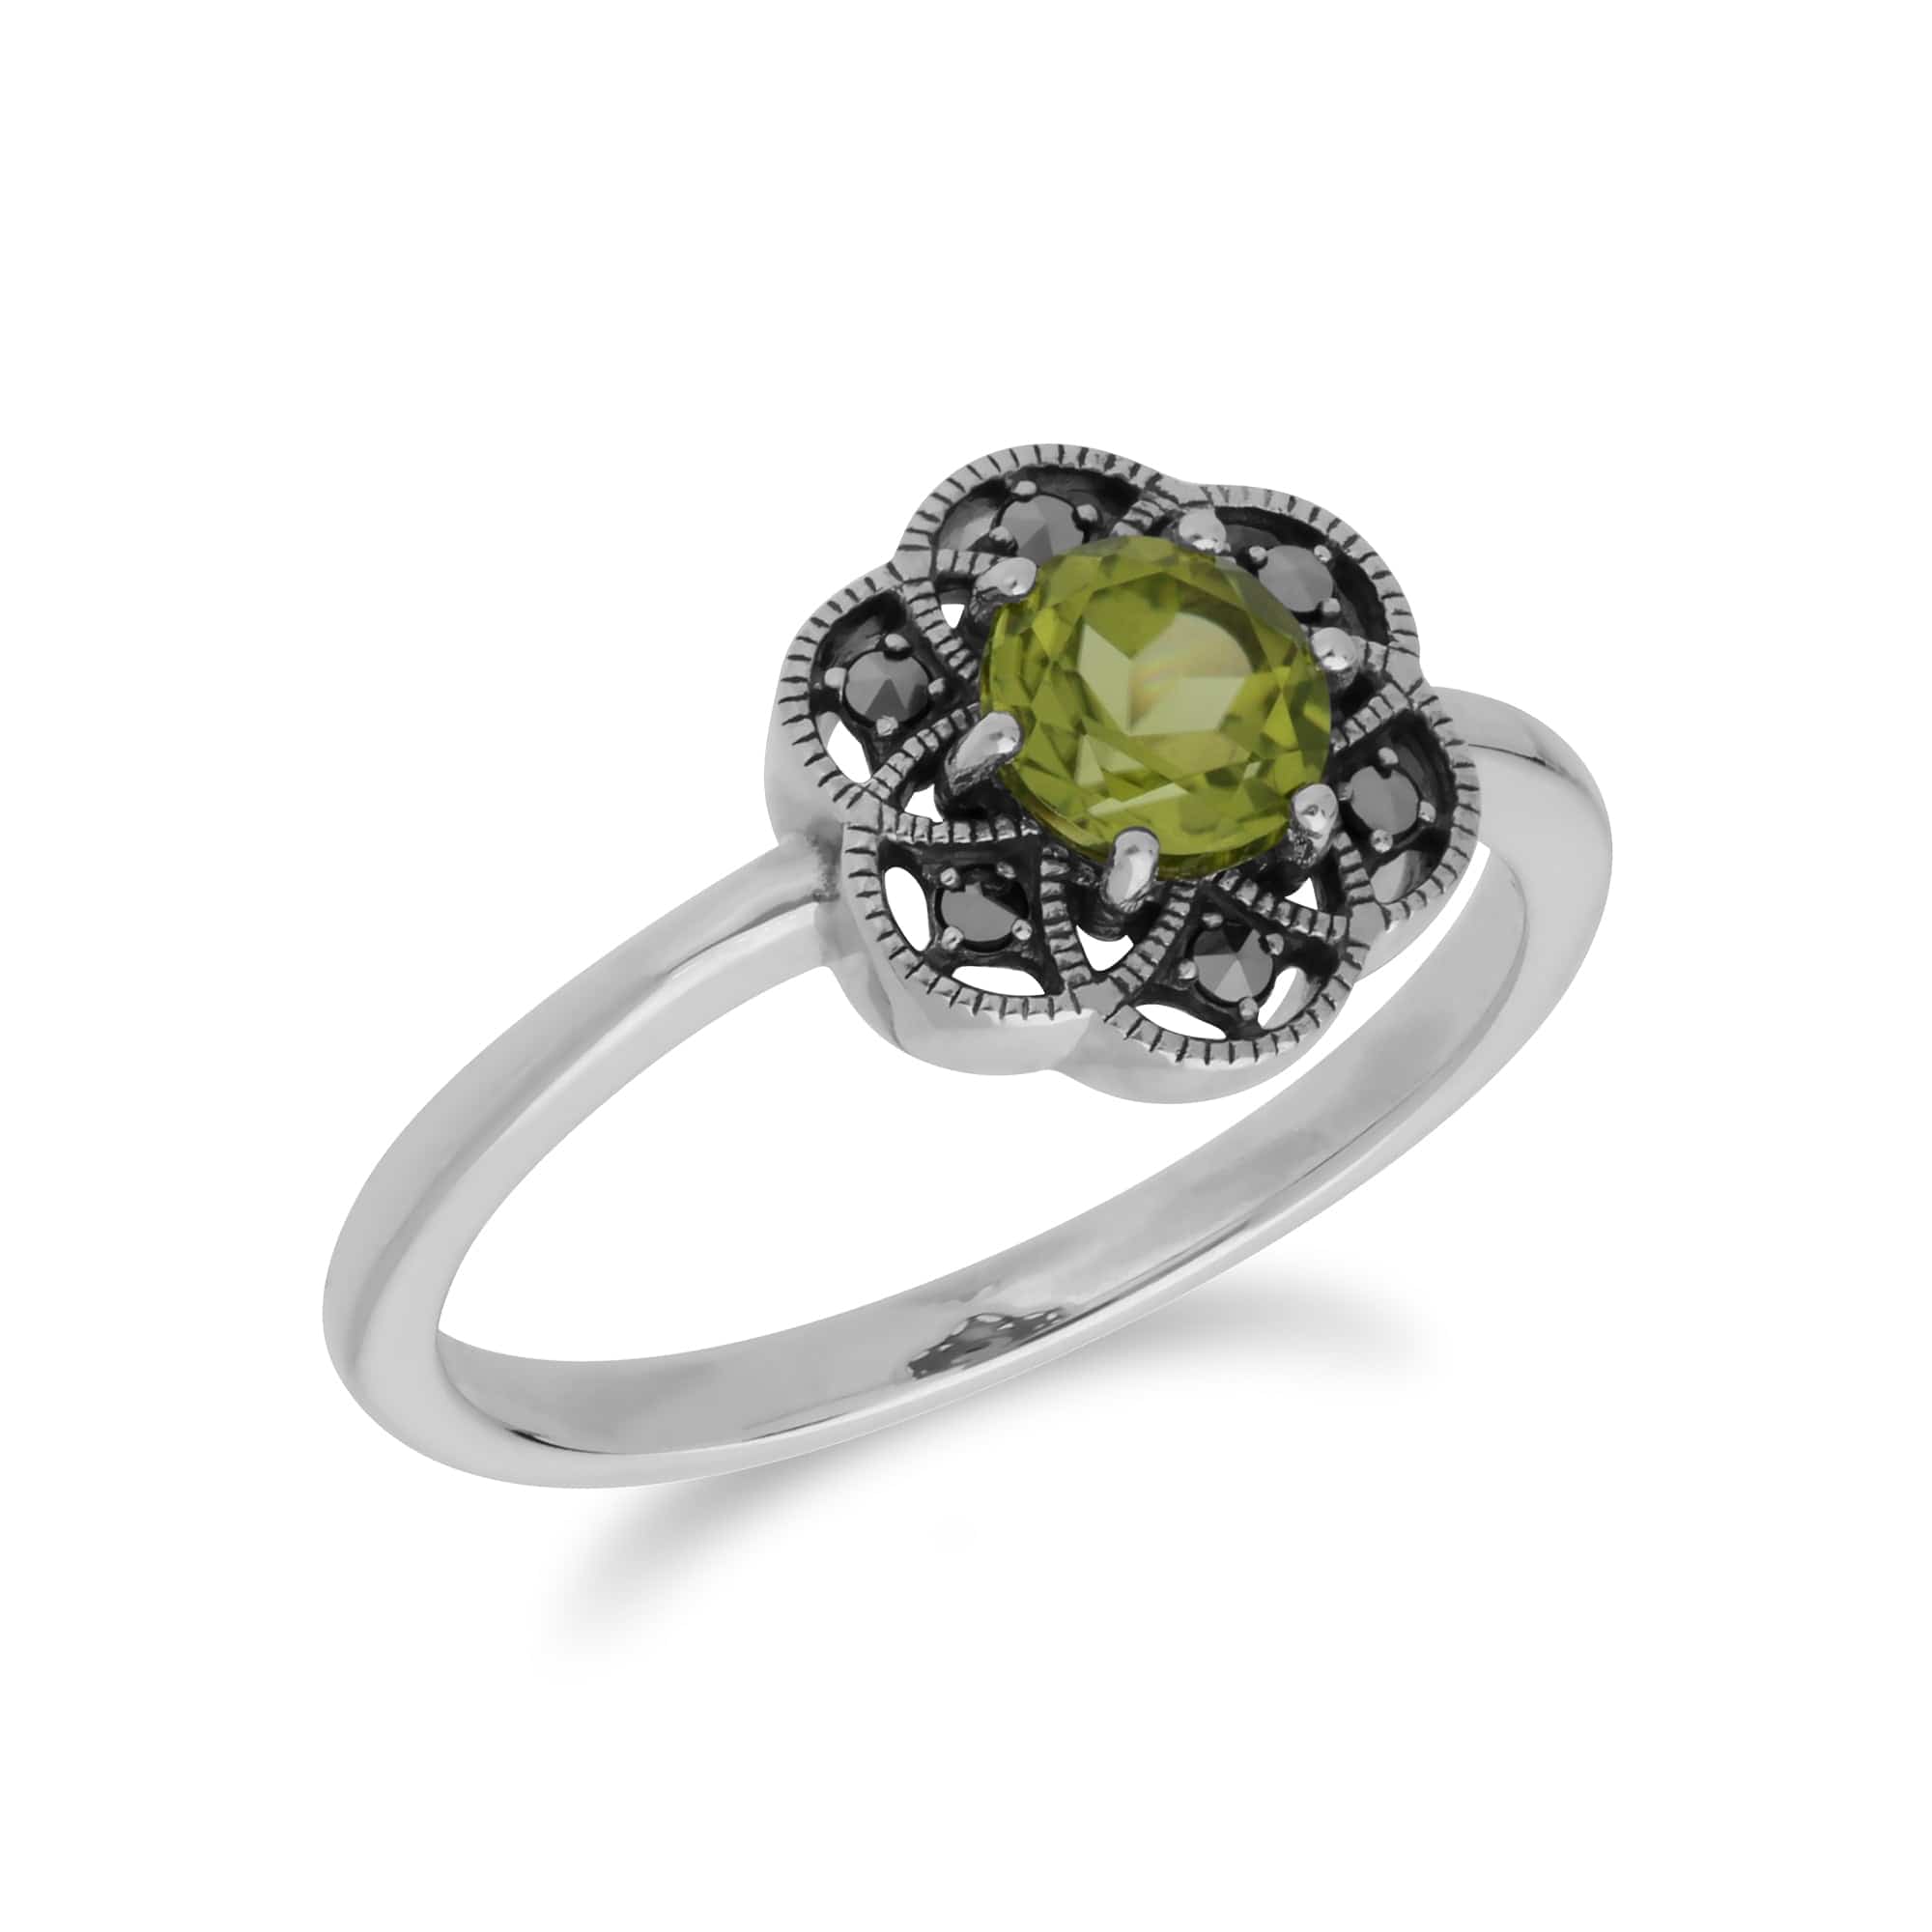 214R599404925 Floral Round Peridot & Marcasite Daisy Ring in 925 Sterling Silver 2